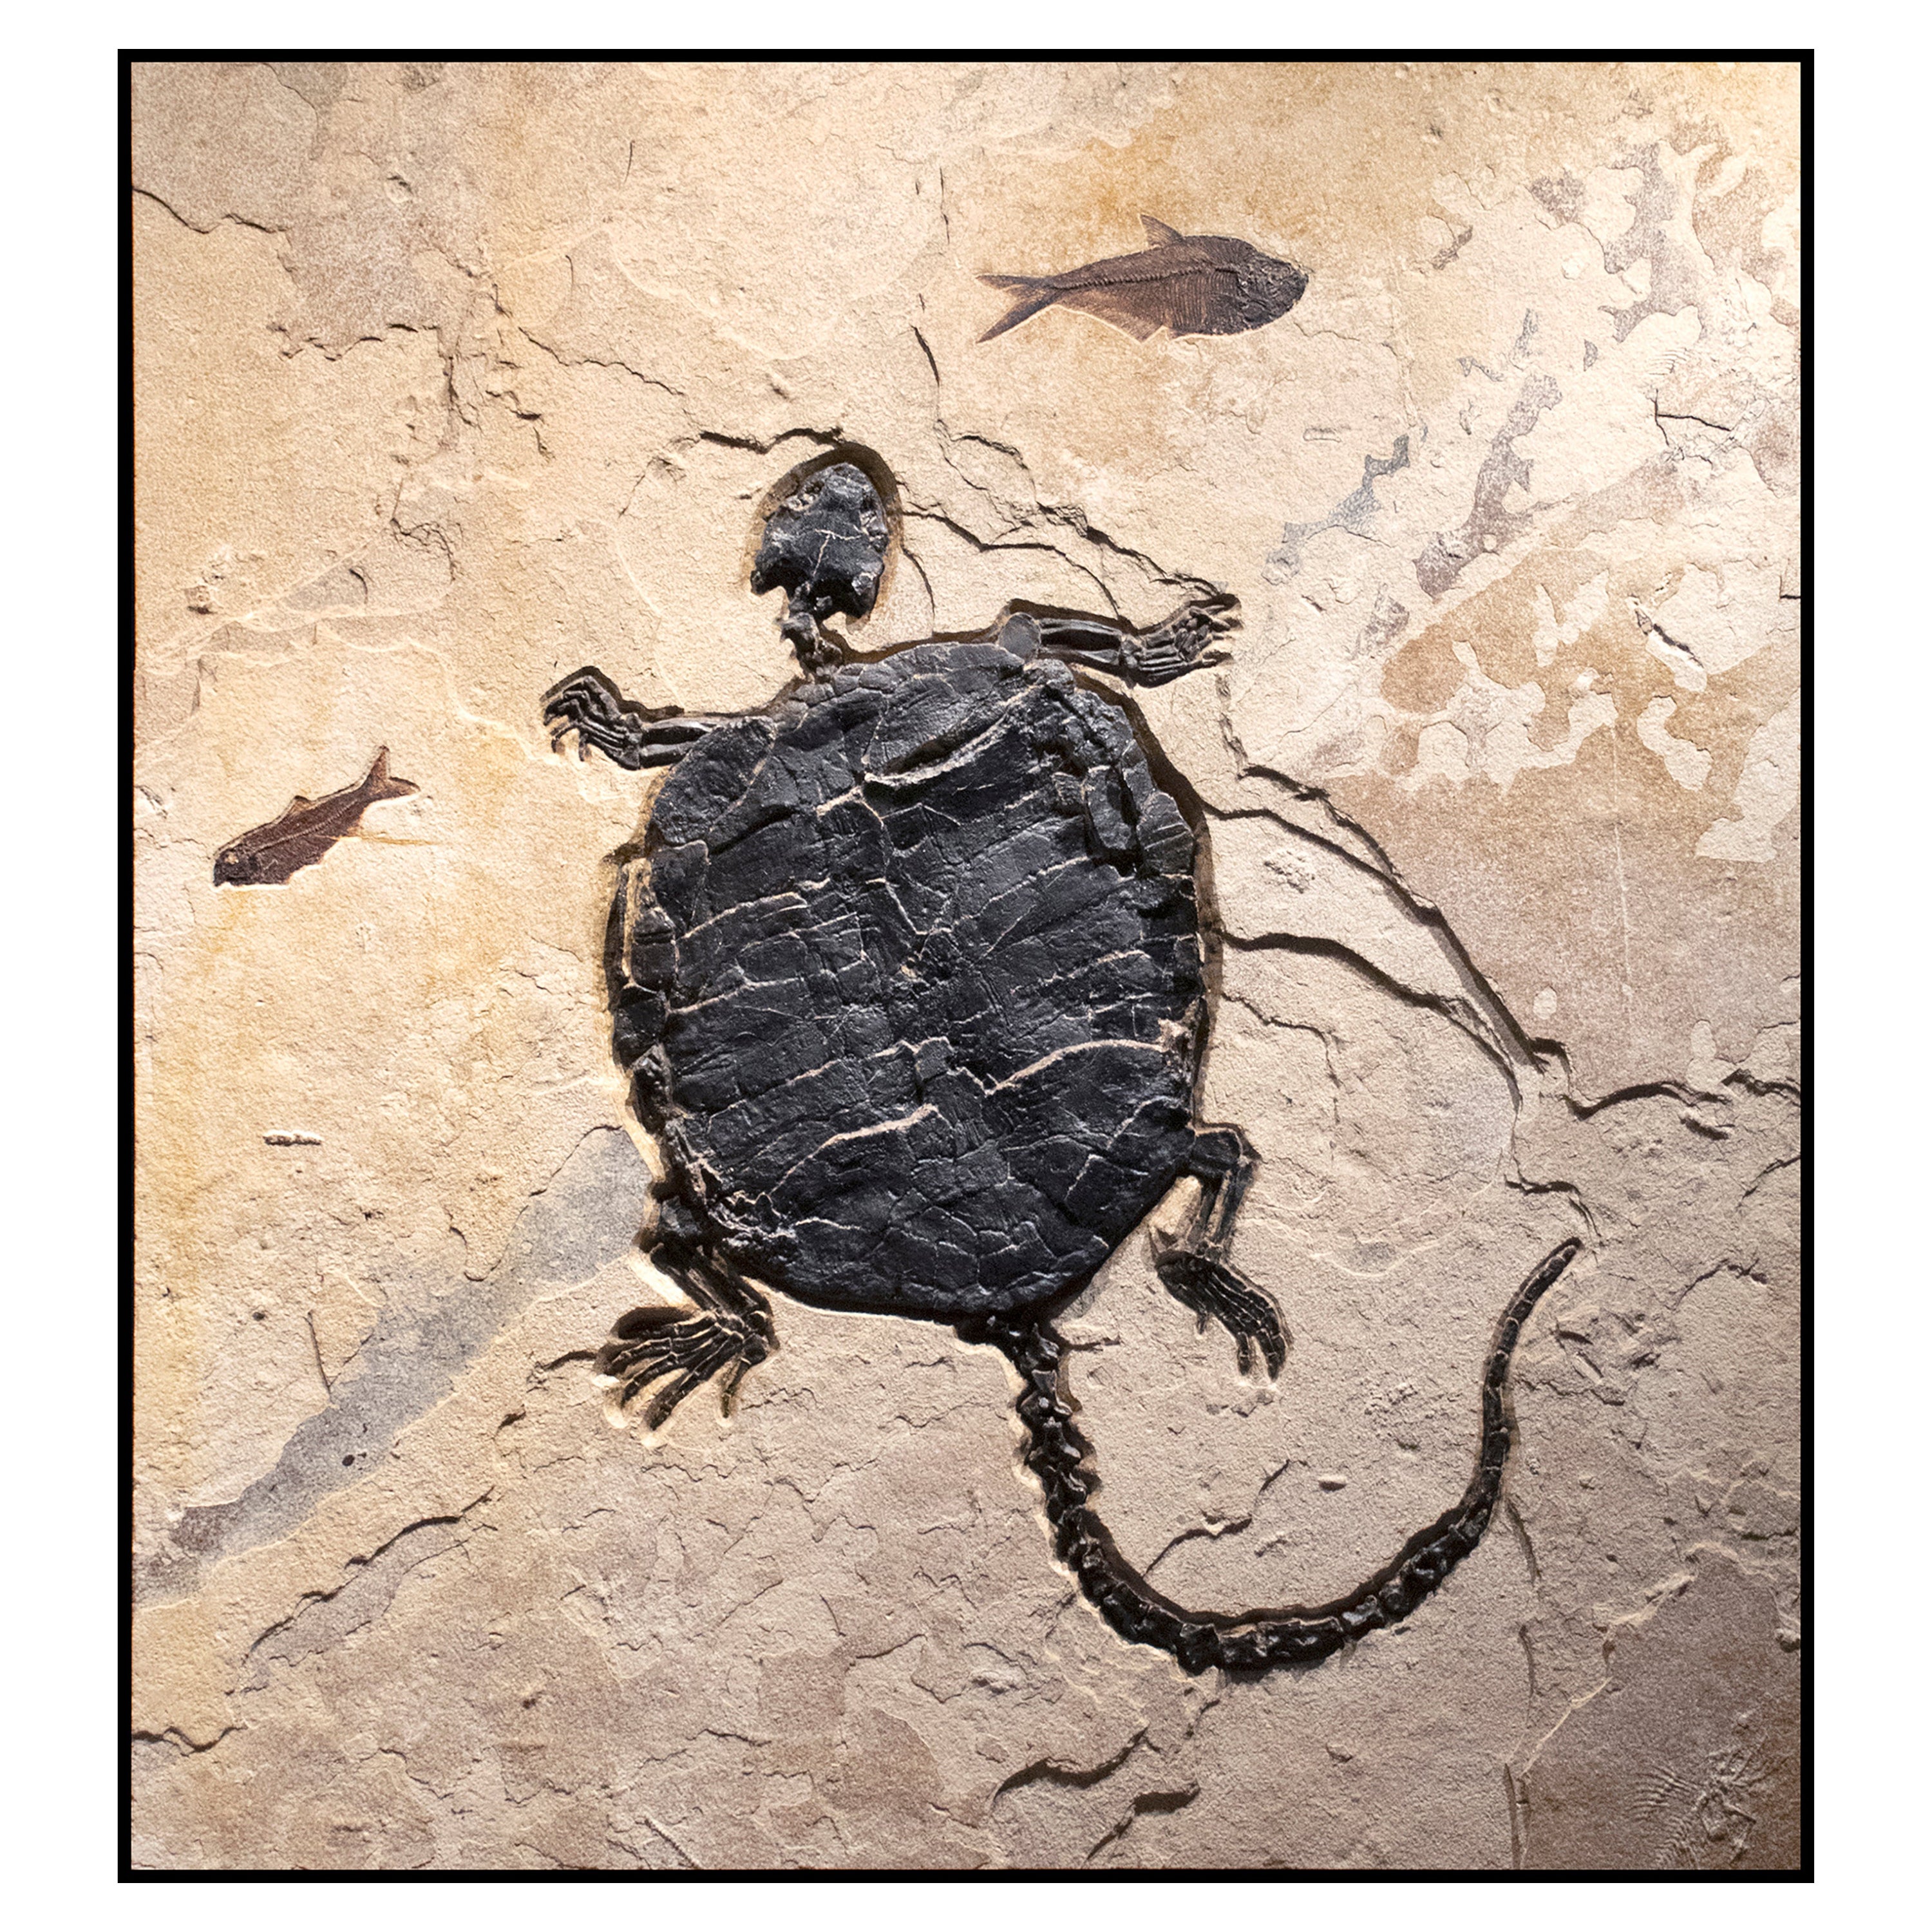 50 Million Year Old Eocene Era Rare Fossil Turtle Mural in Stone, from Wyoming